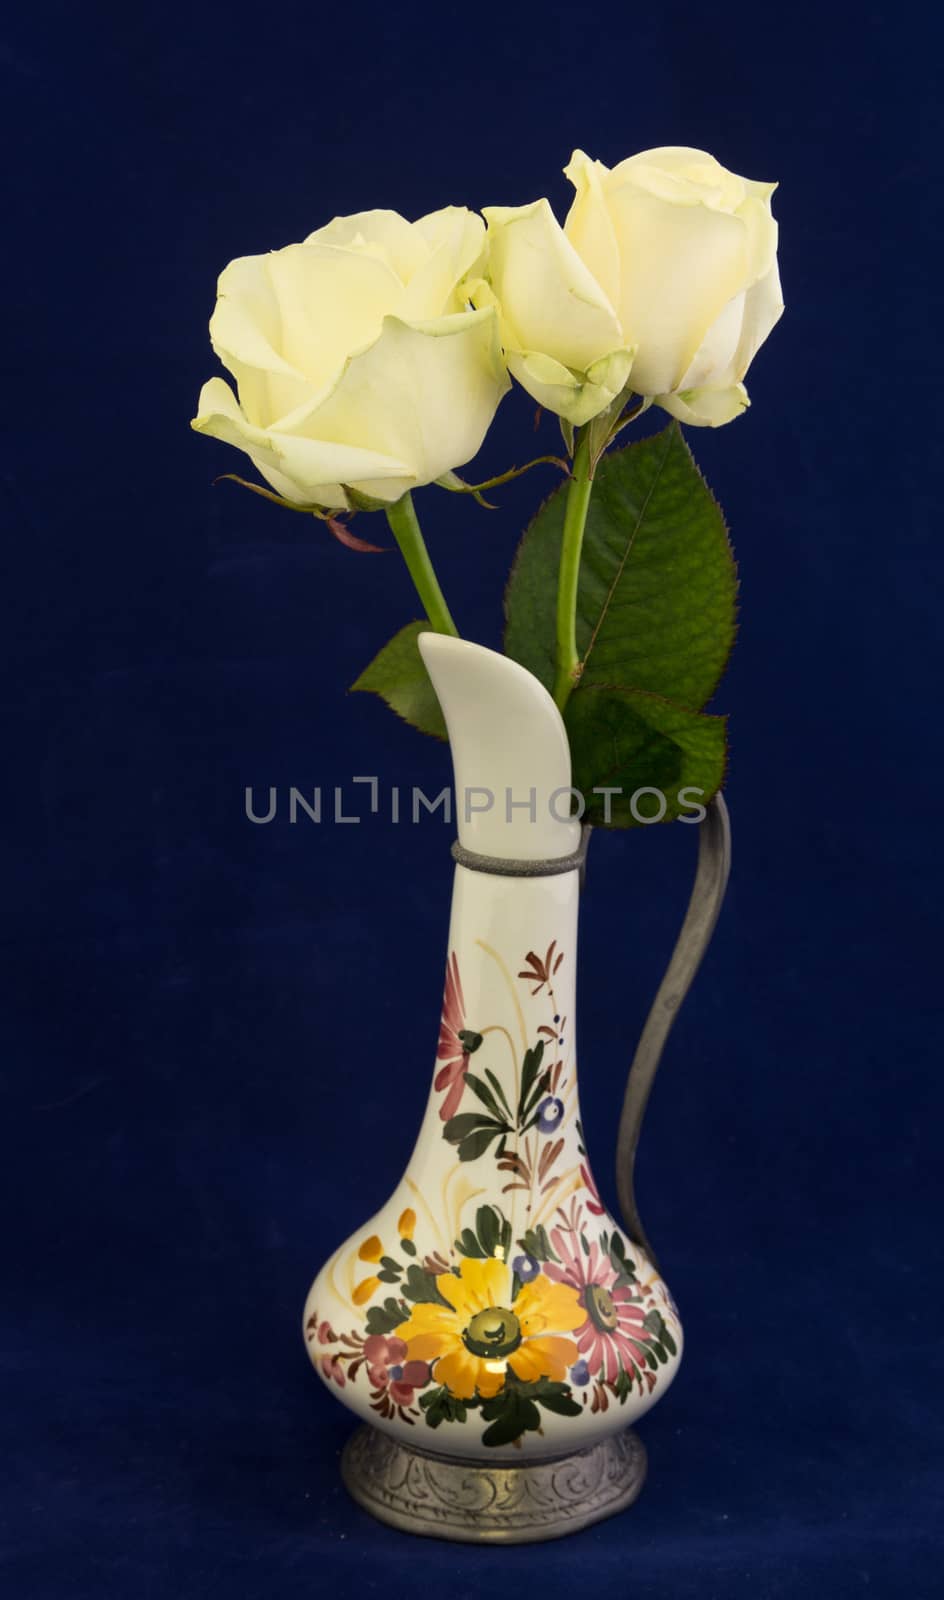 two white roses in a decorated vase with blue background